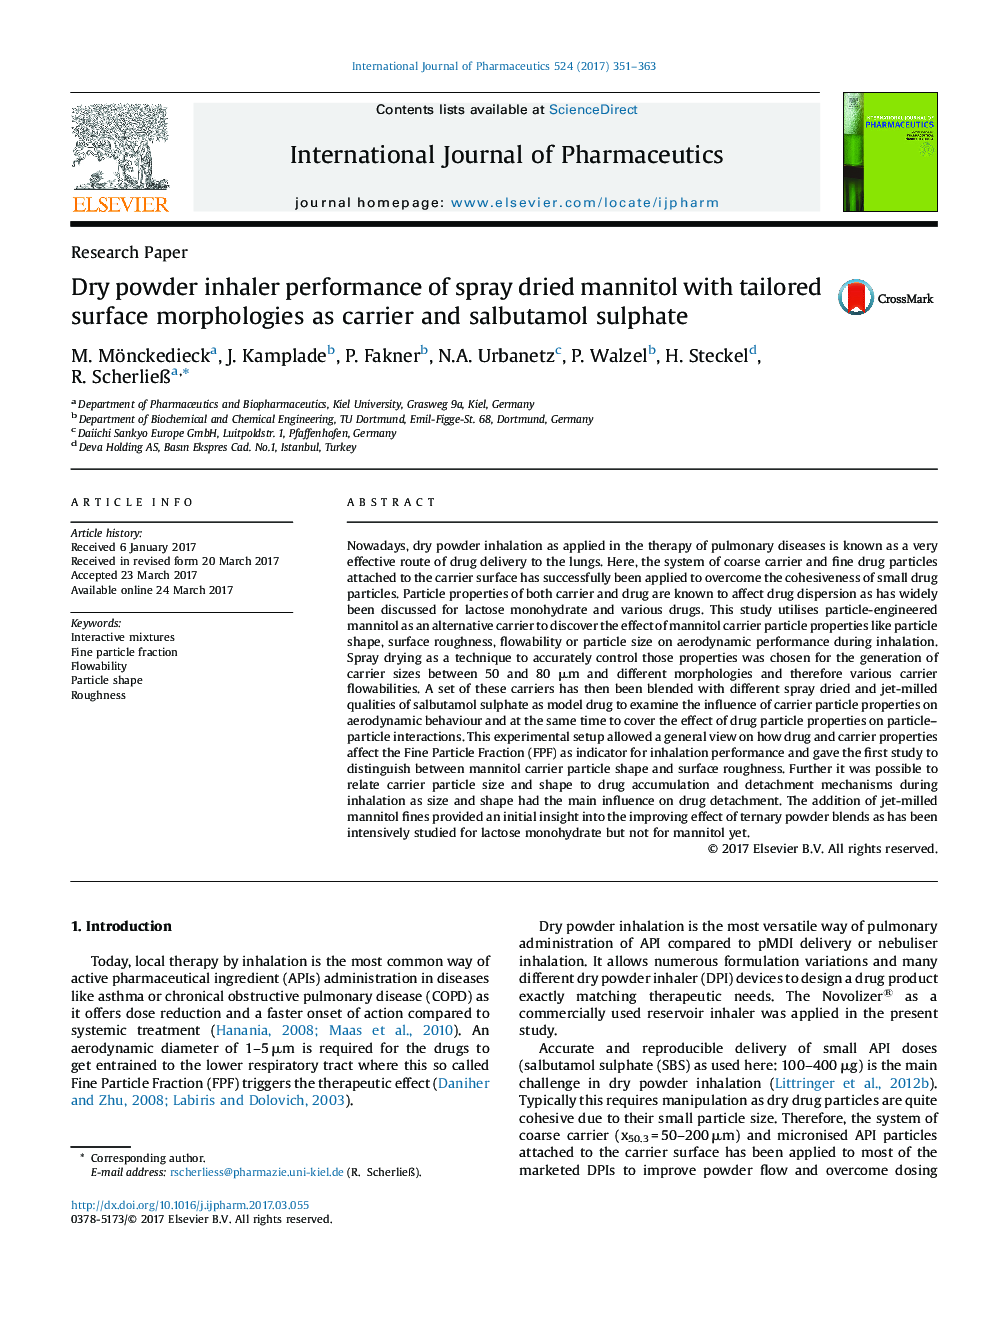 Dry powder inhaler performance of spray dried mannitol with tailored surface morphologies as carrier and salbutamol sulphate